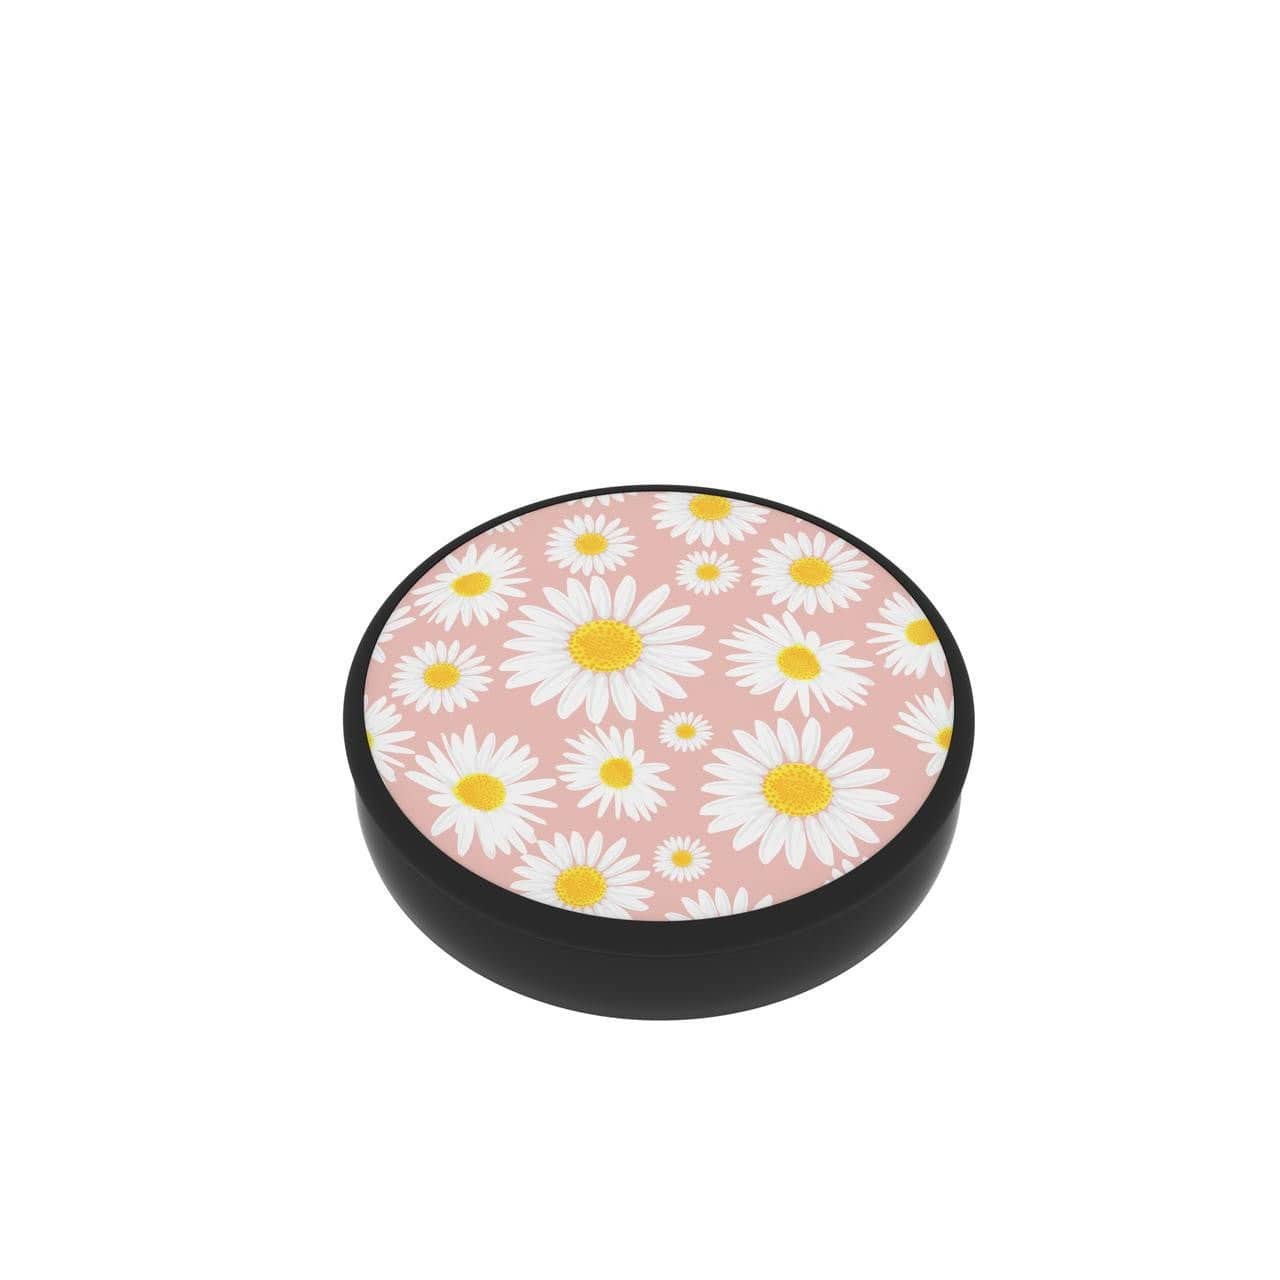 Magnetic Phone Grip and Stand with built in magnets (Daisies)